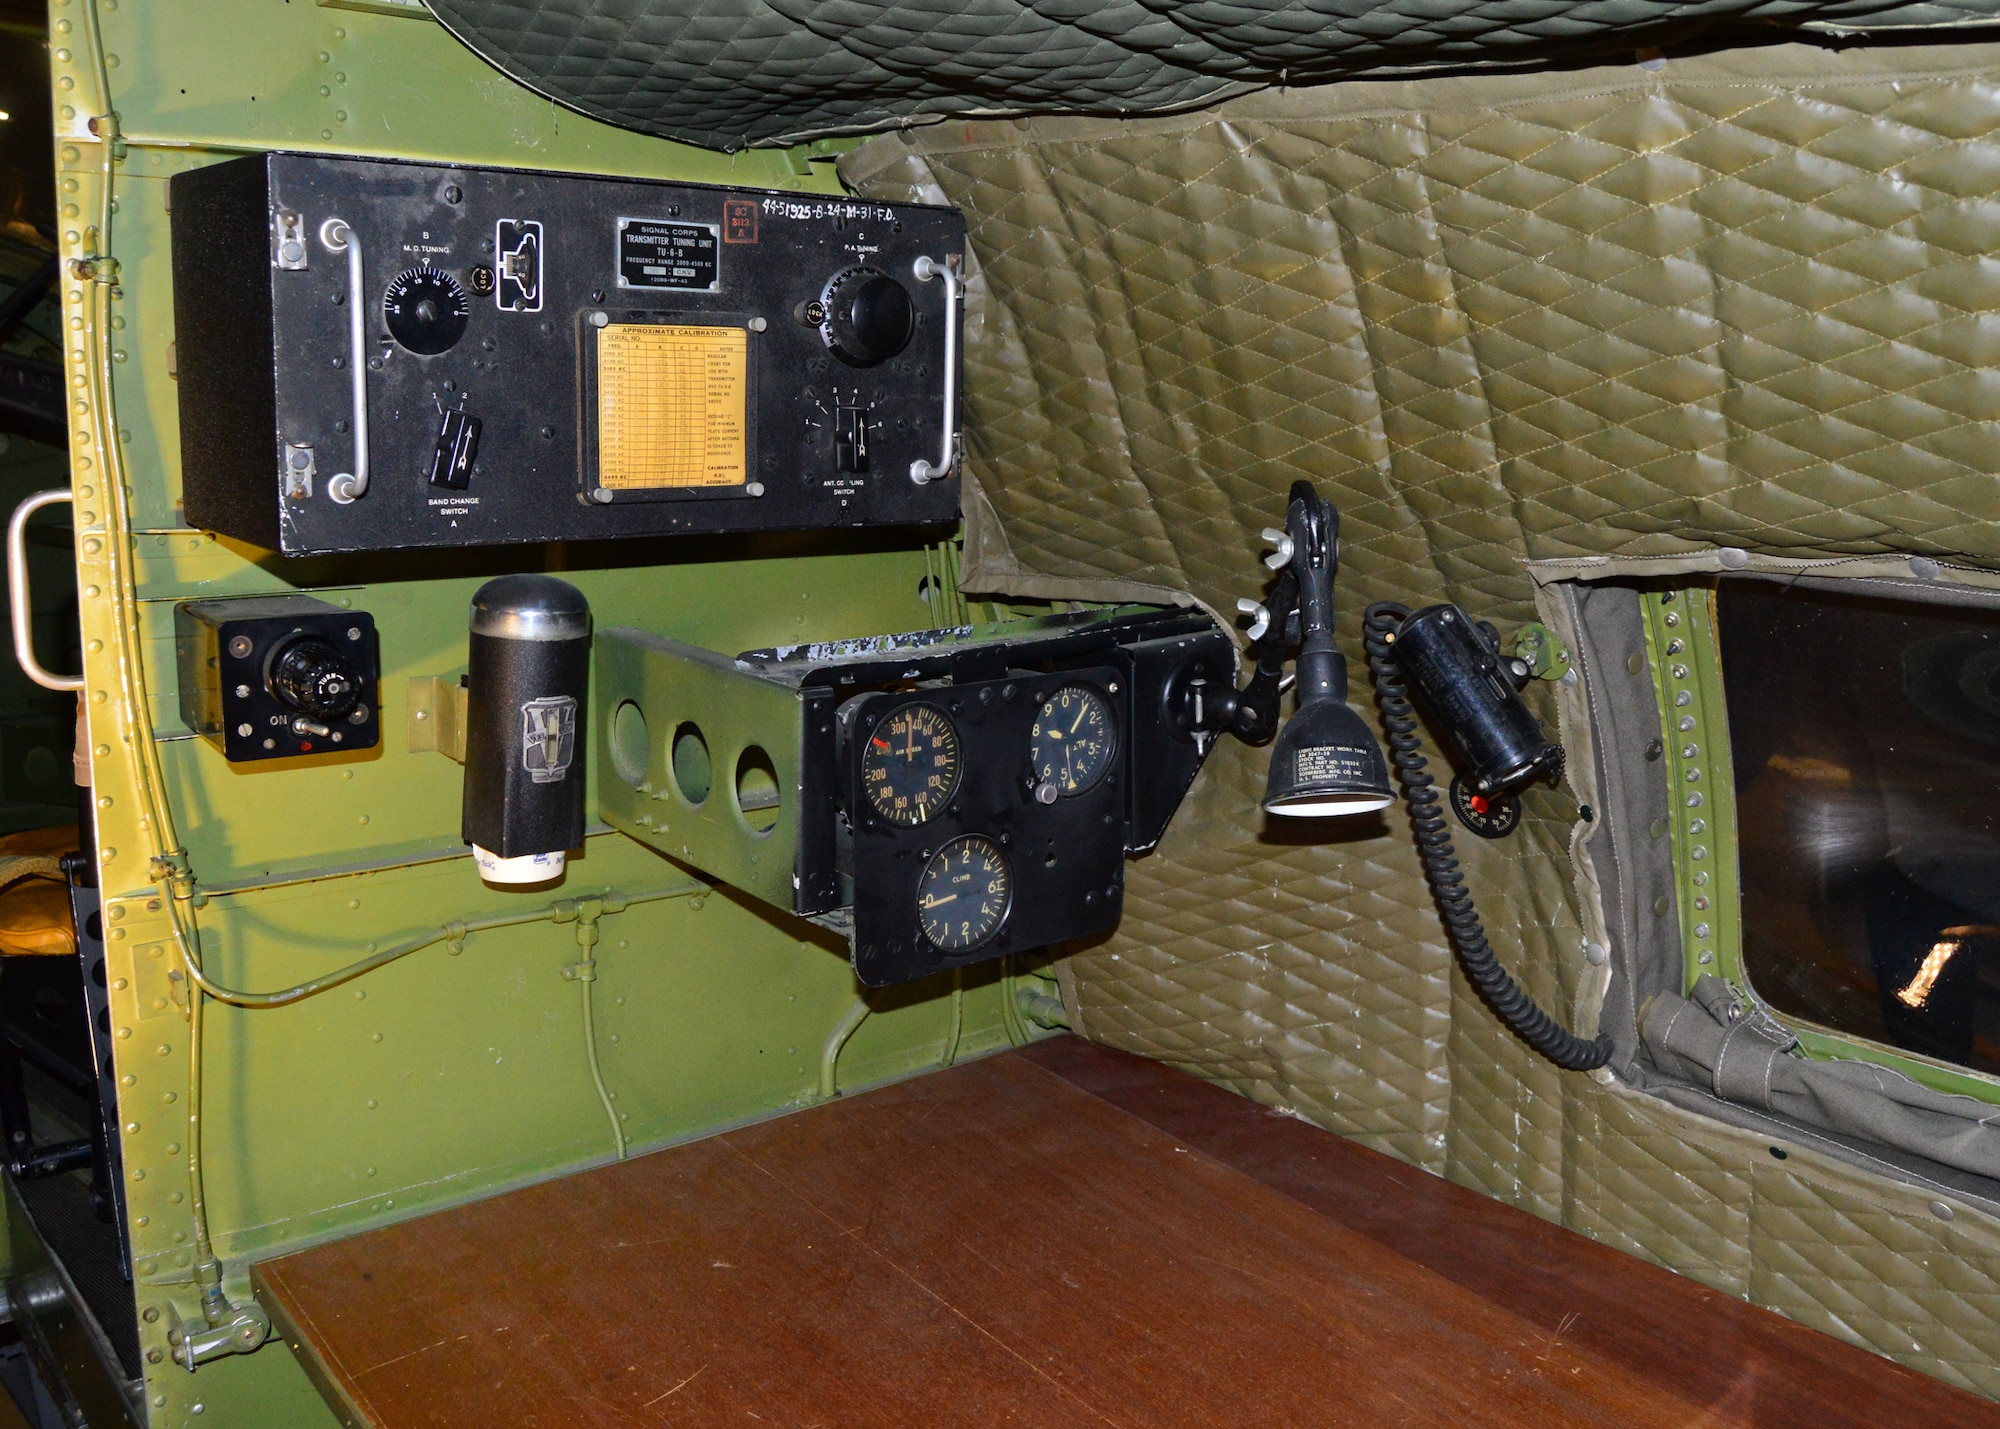 DAYTON, Ohio - Martin B-26G Marauder interior view at the National Museum of the U.S. Air Force. (U.S. Air Force photo)